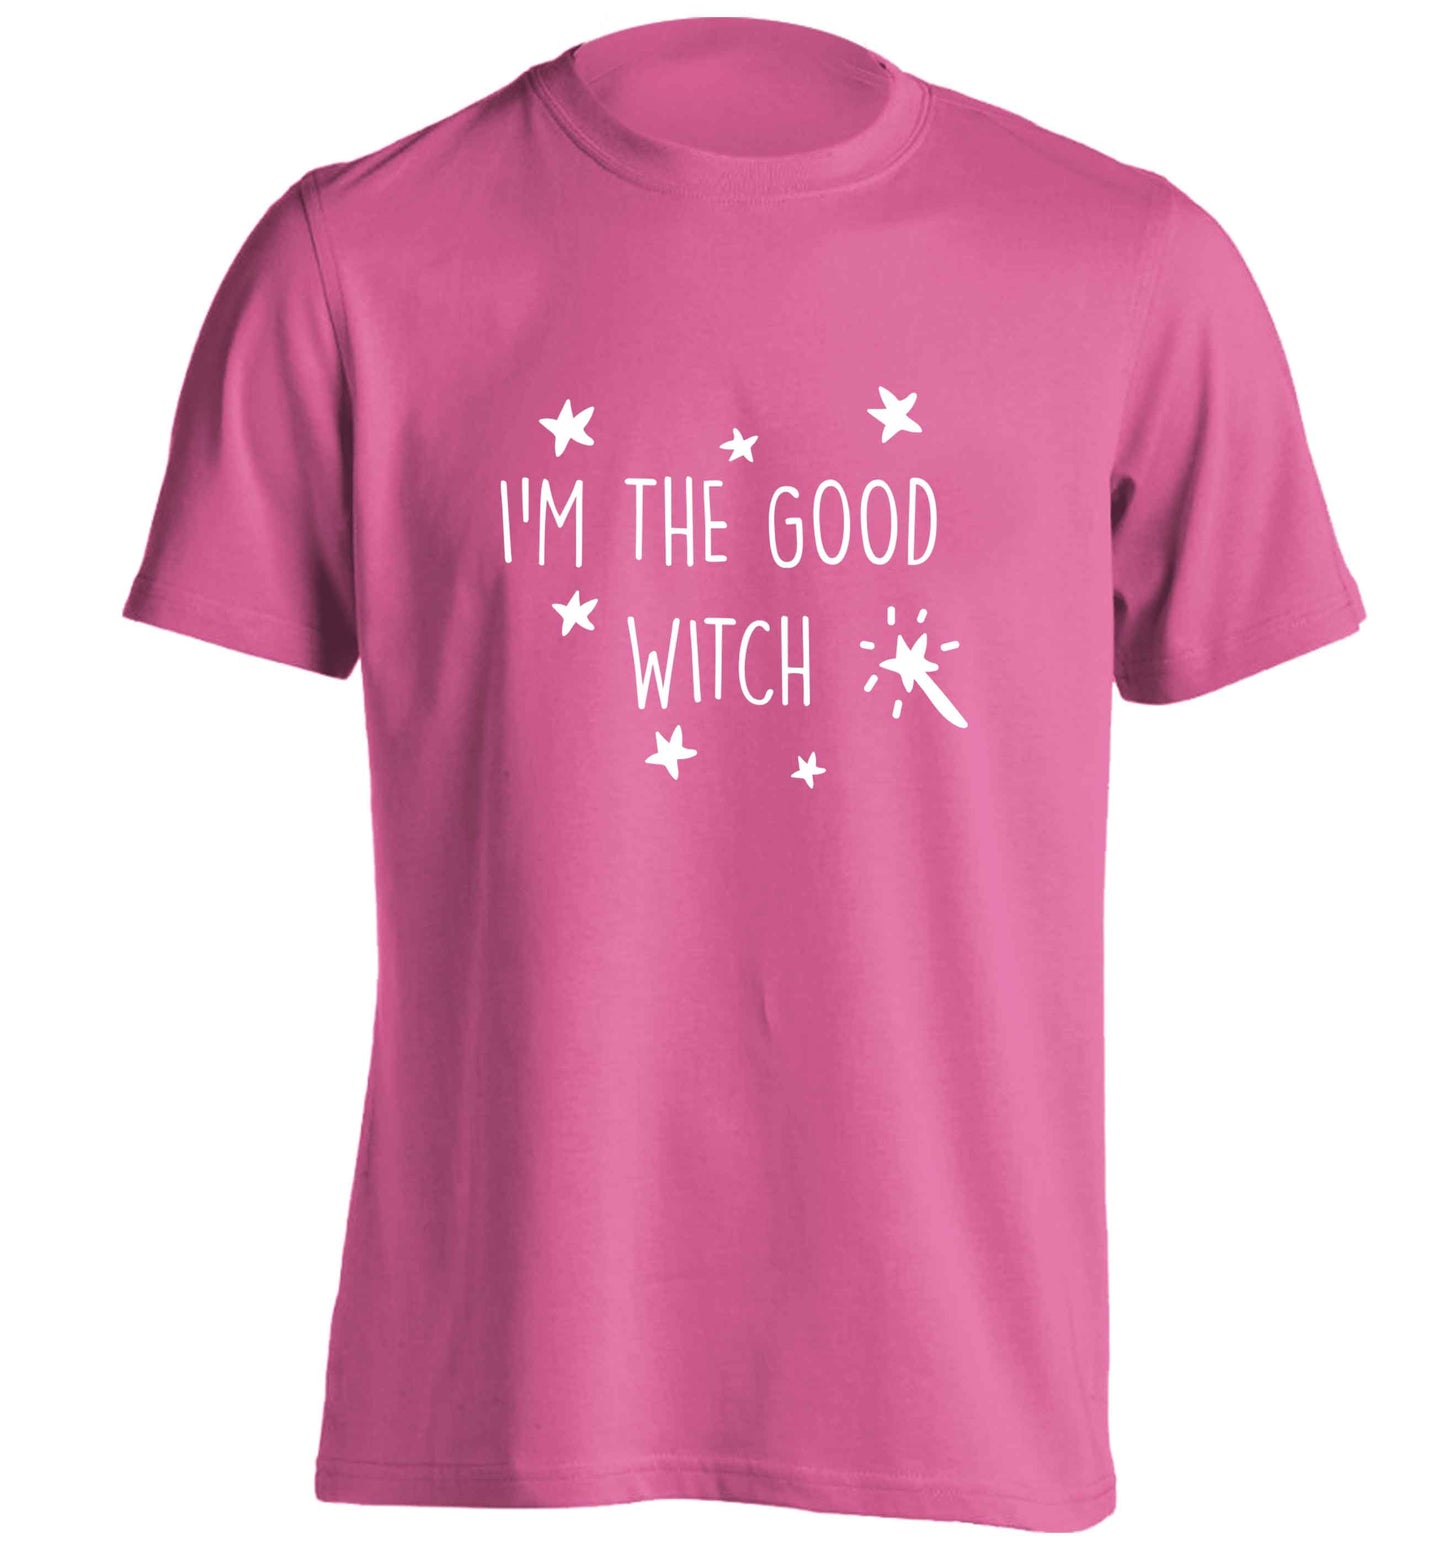 Good witch adults unisex pink Tshirt 2XL